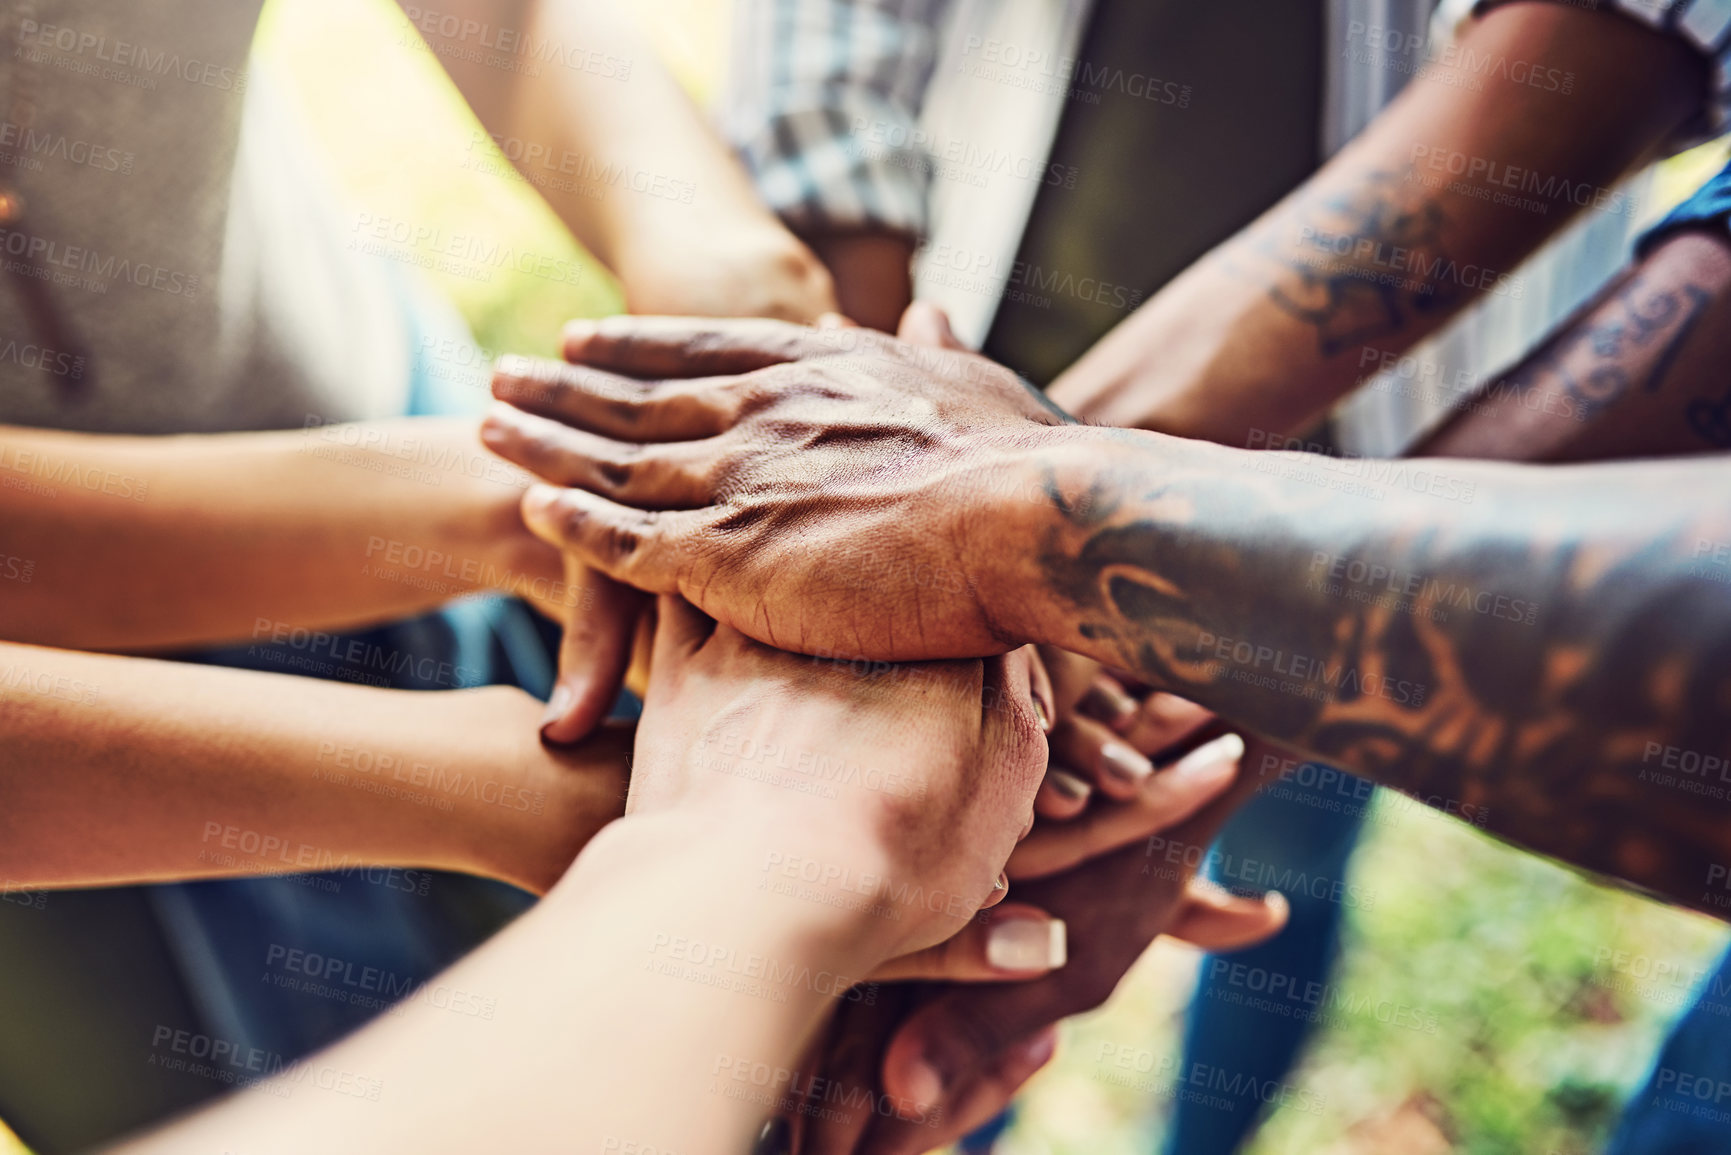 Buy stock photo Closeup shot of an unrecognizable group of people joining their hands in a huddle outdoors